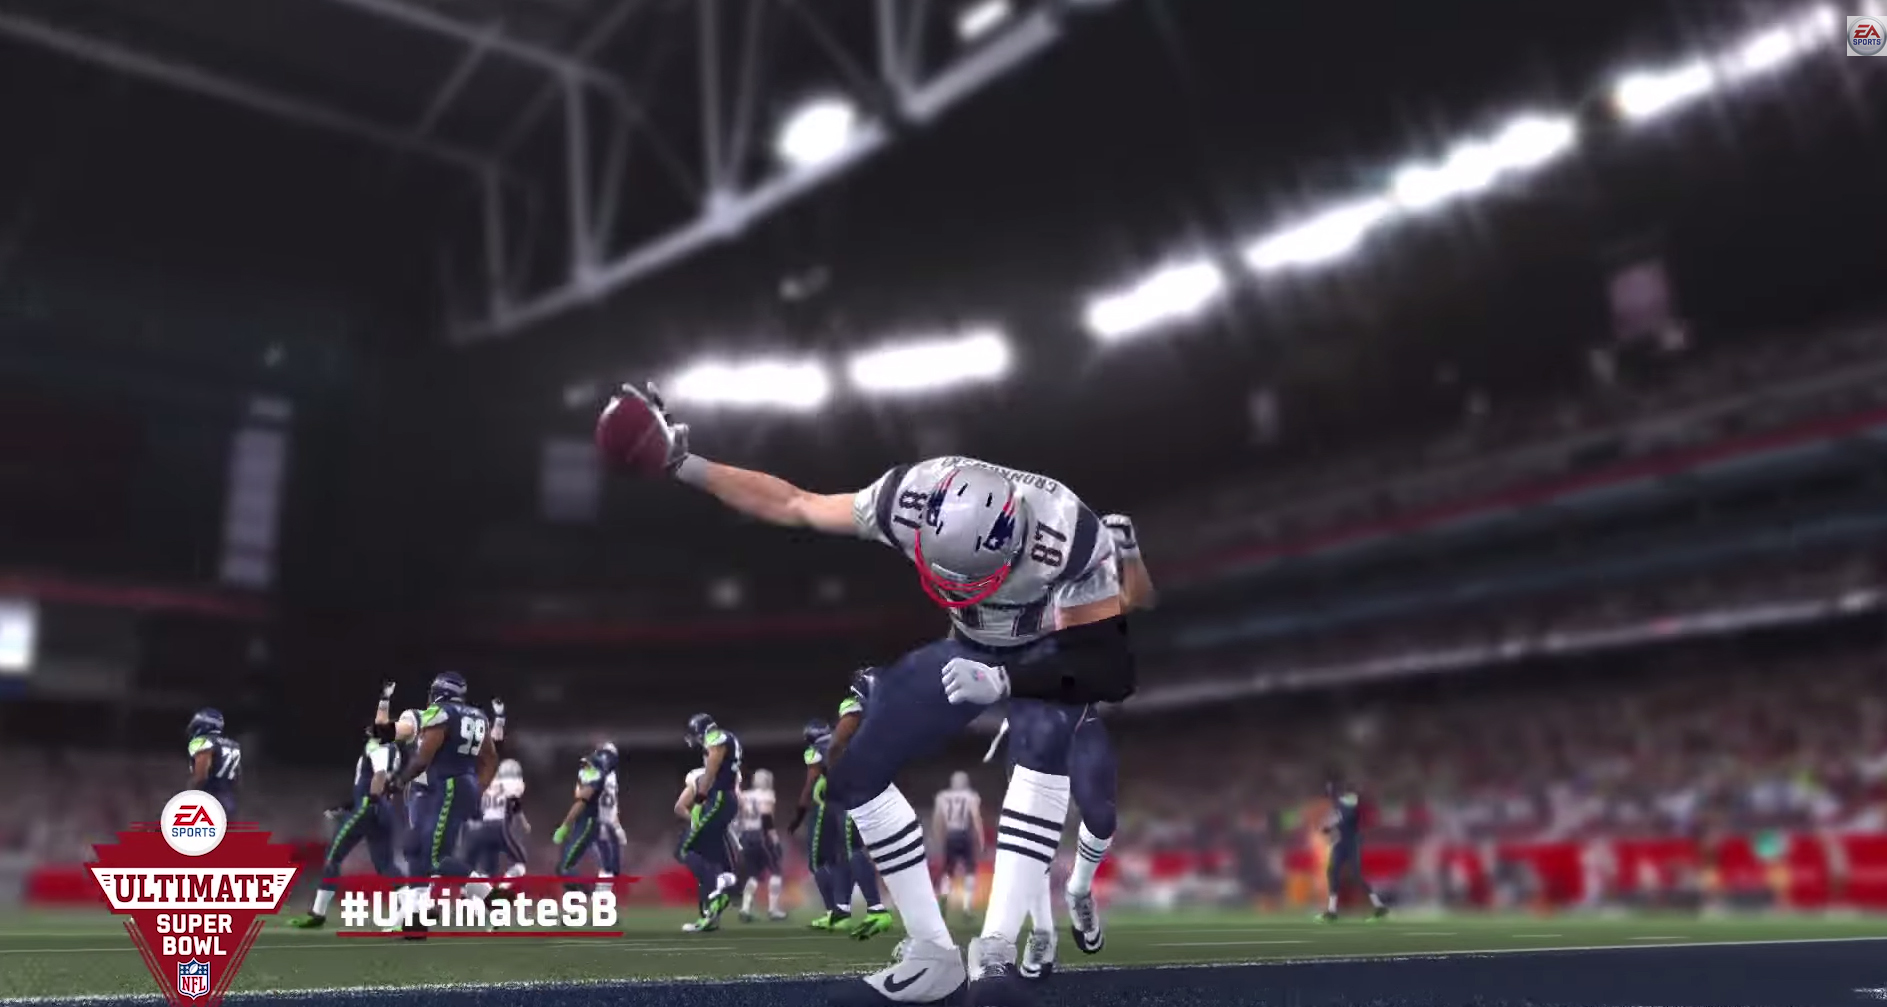 PHOTO: New England Patriots Rob Gronkowski celebrates a touchdown in a still from a video game simulation published by Electronic Arts that predicted the winner of Super Bowl XLIX.